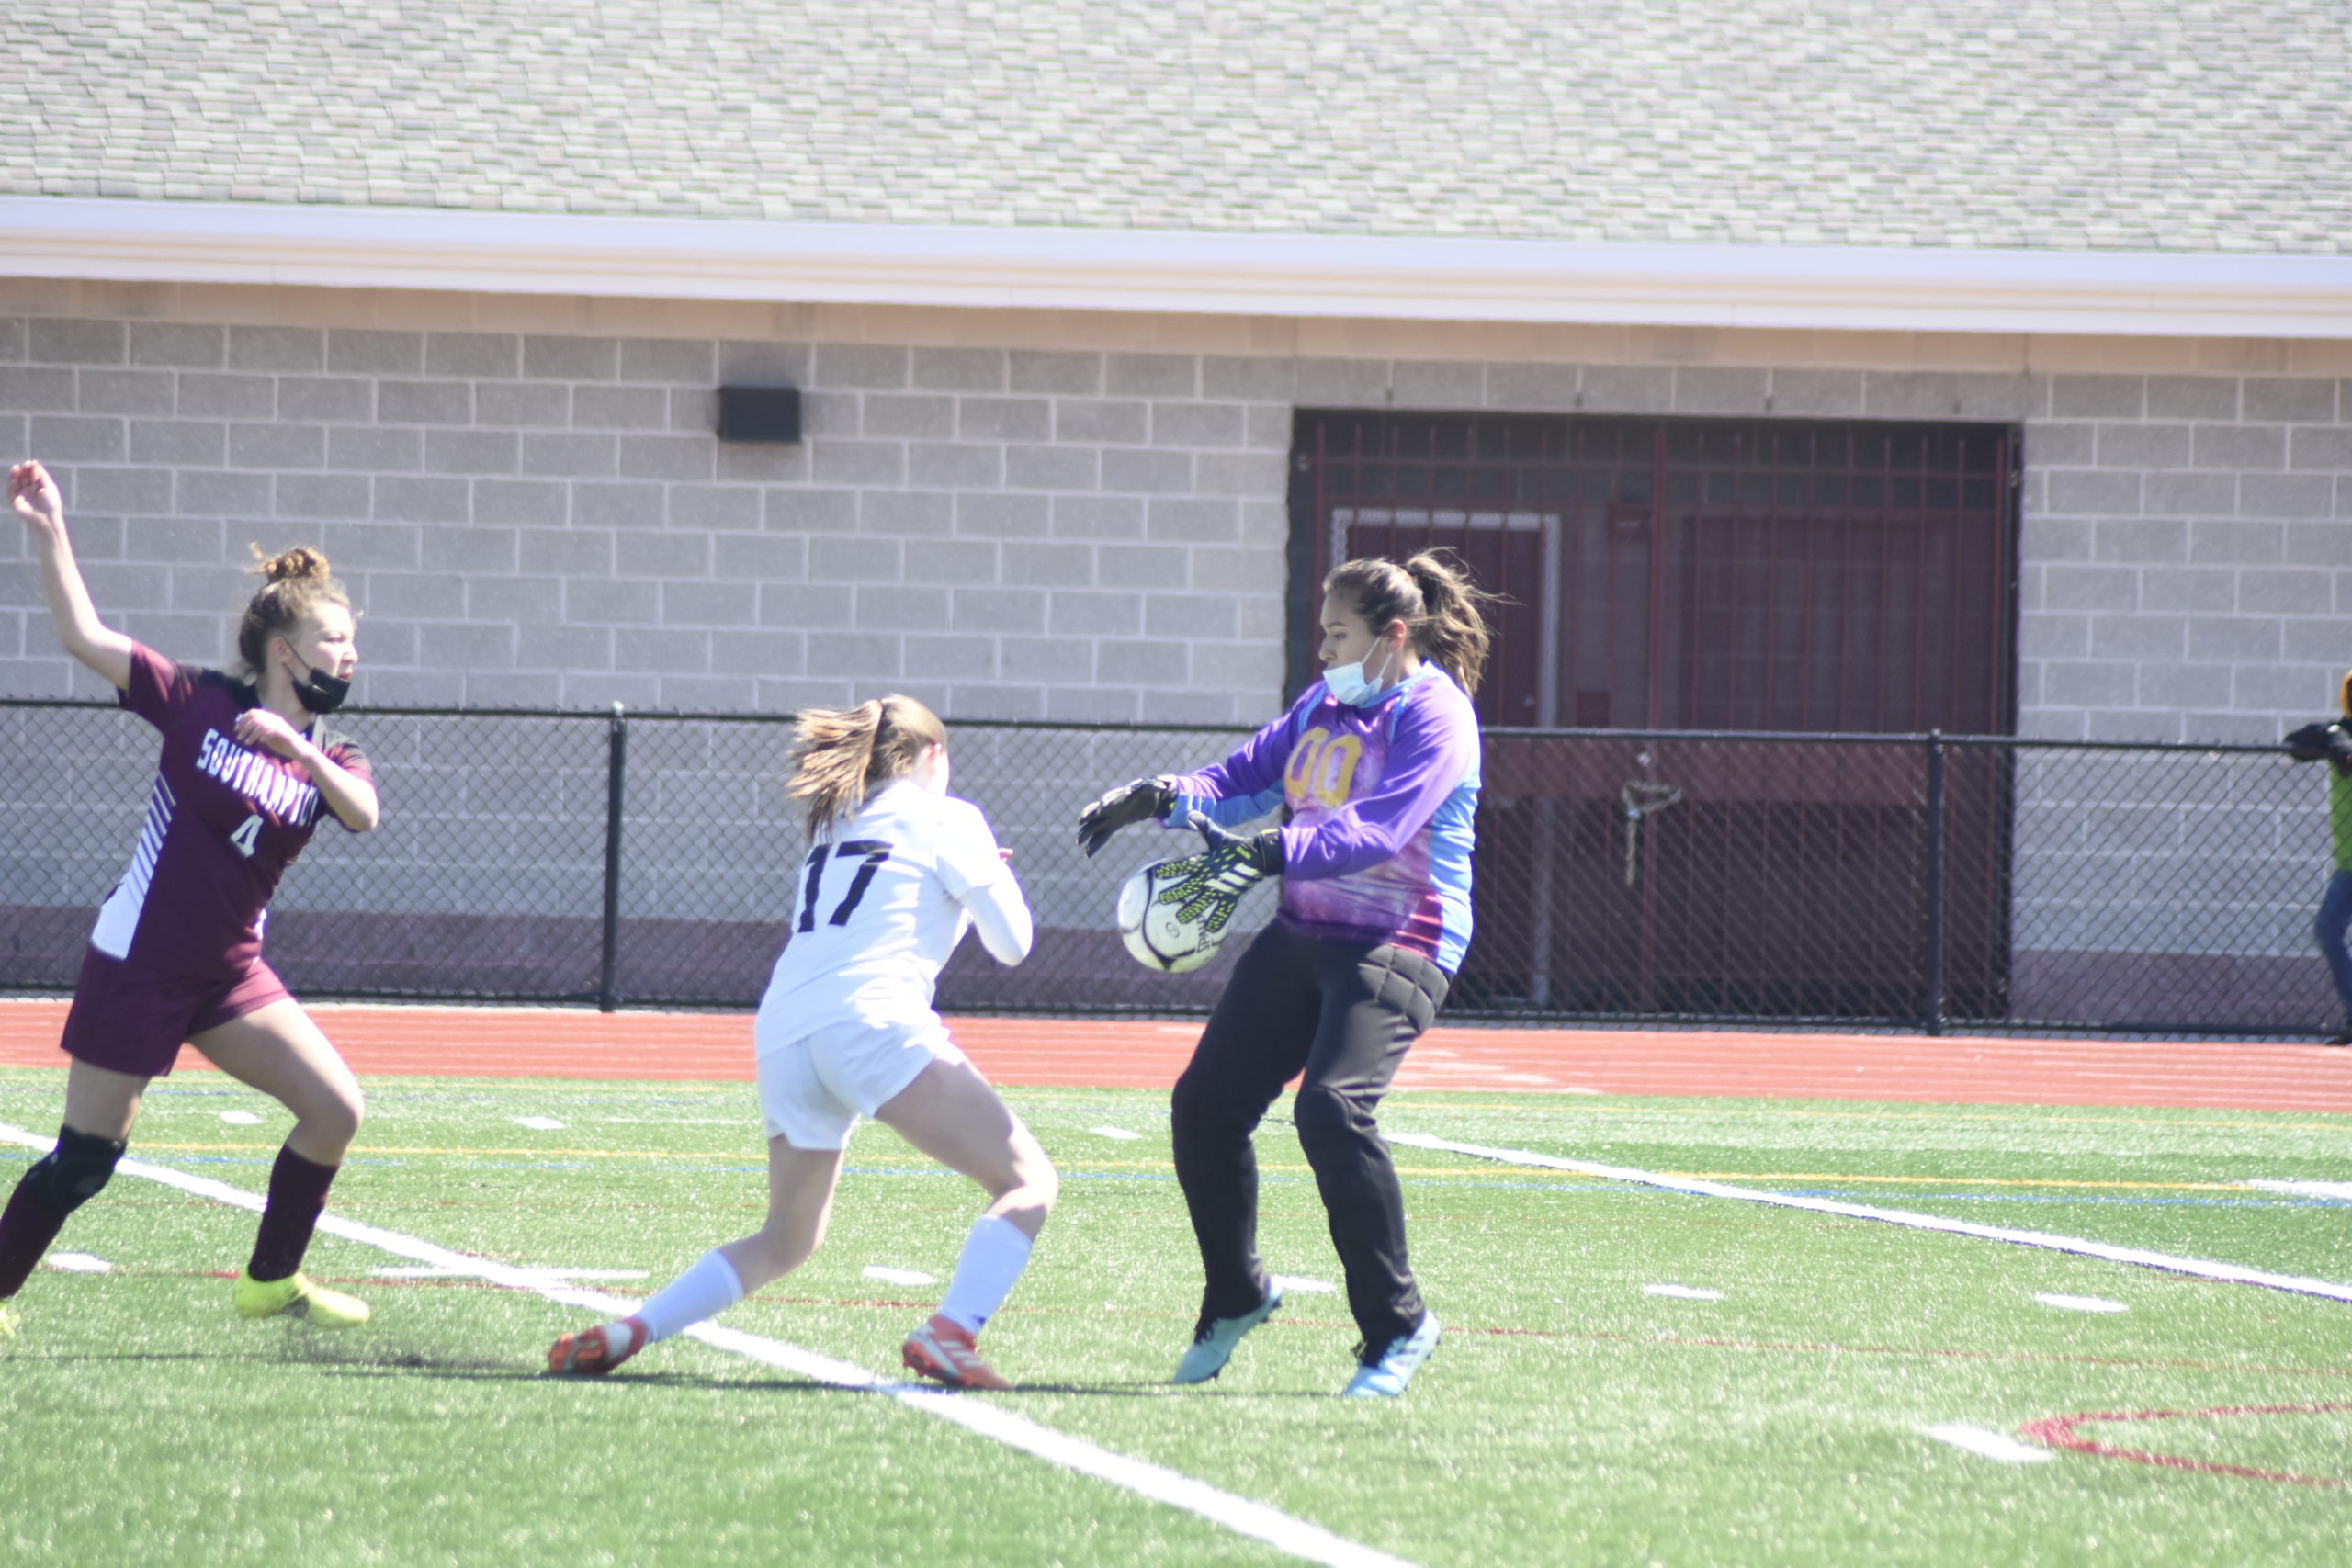 Southampton senior goalie Kendra Jimenez comes out to play a loose ball in the box before a Babylon player gets to it.